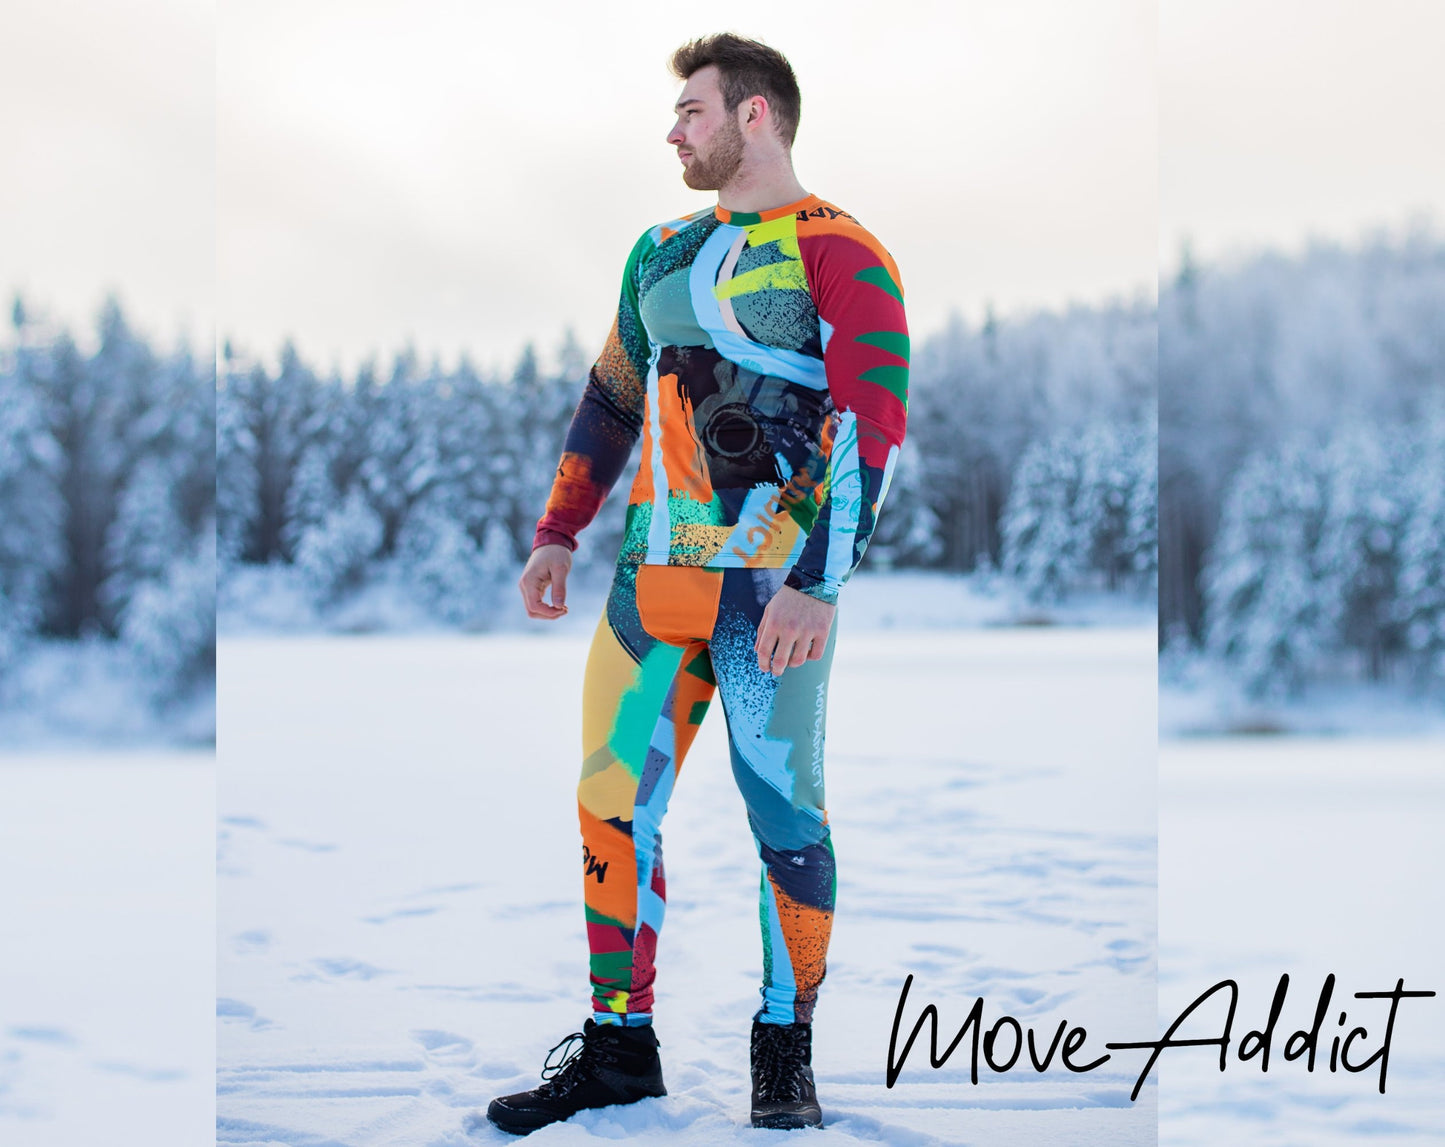 Thermal Leggings, Men's Thermal Protective Underwear, Winter Sportswear, Leggings with fleece, Warm shirt, Thermal Clothes, Men's Clothing